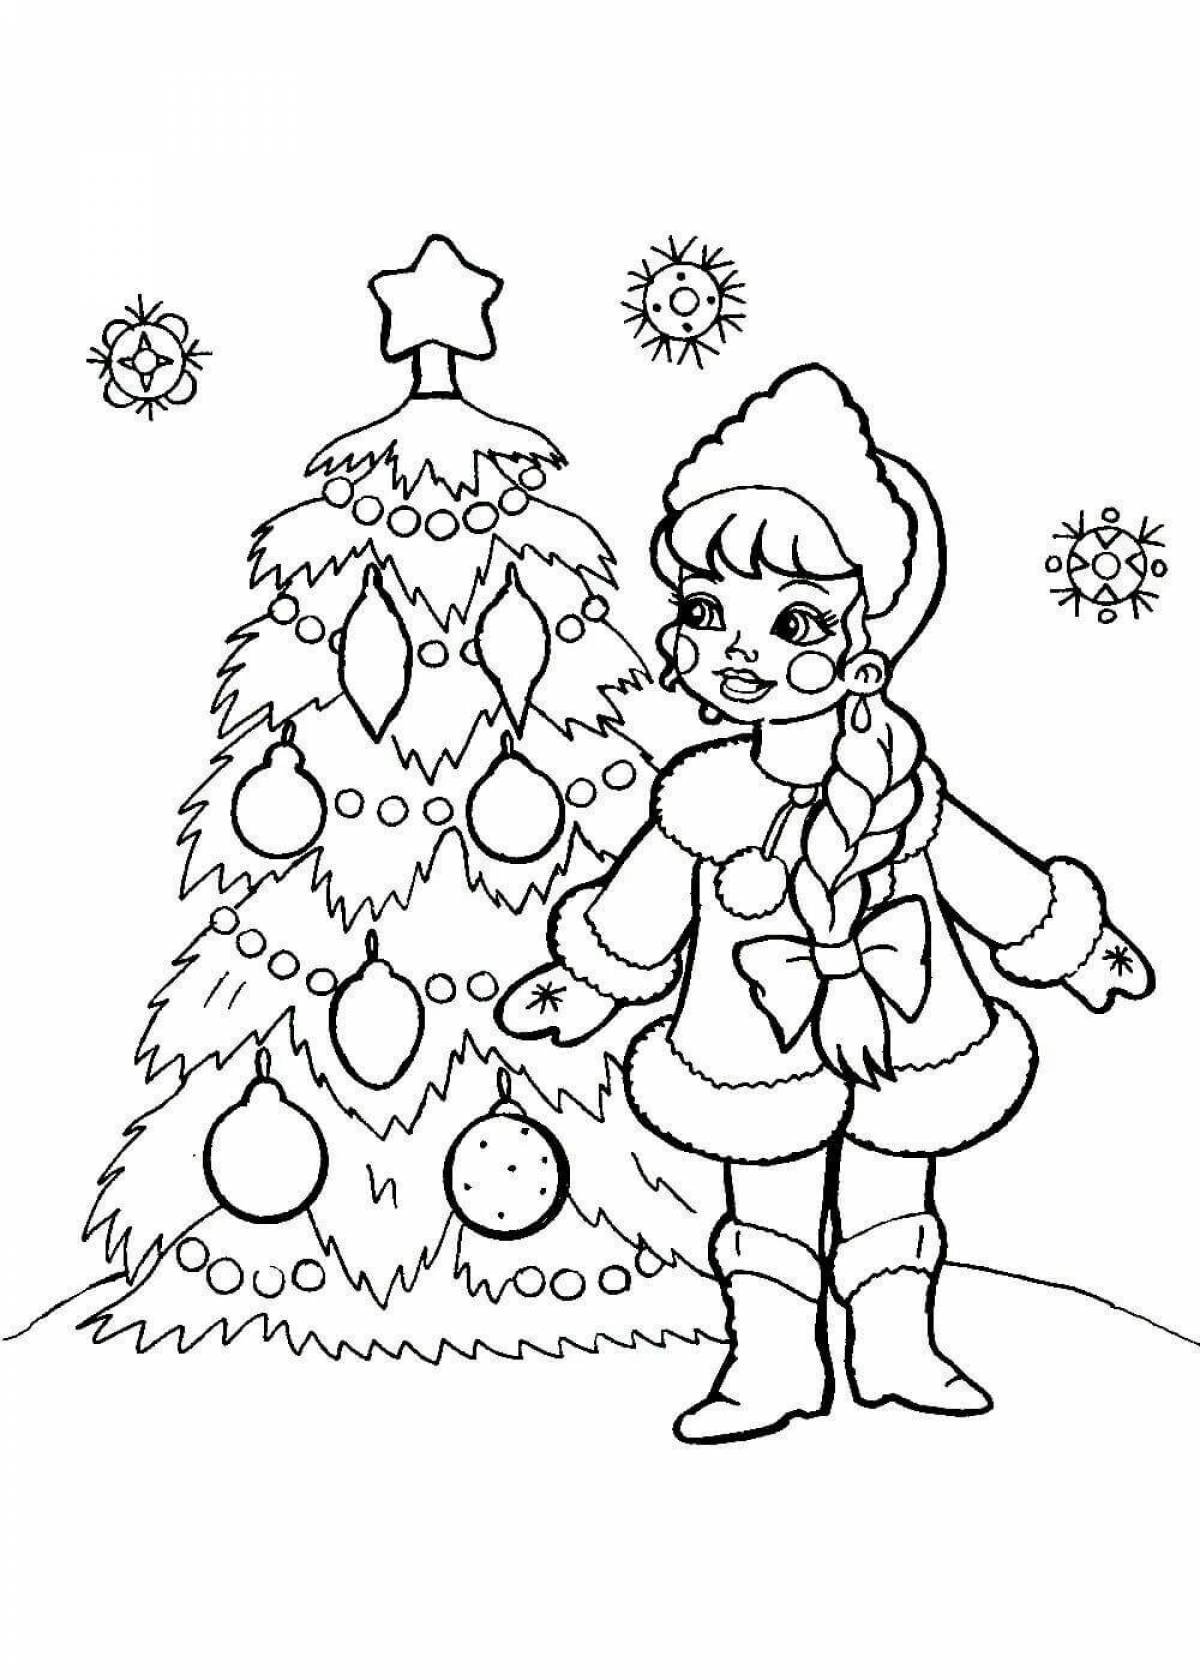 Tree and snow maiden #3